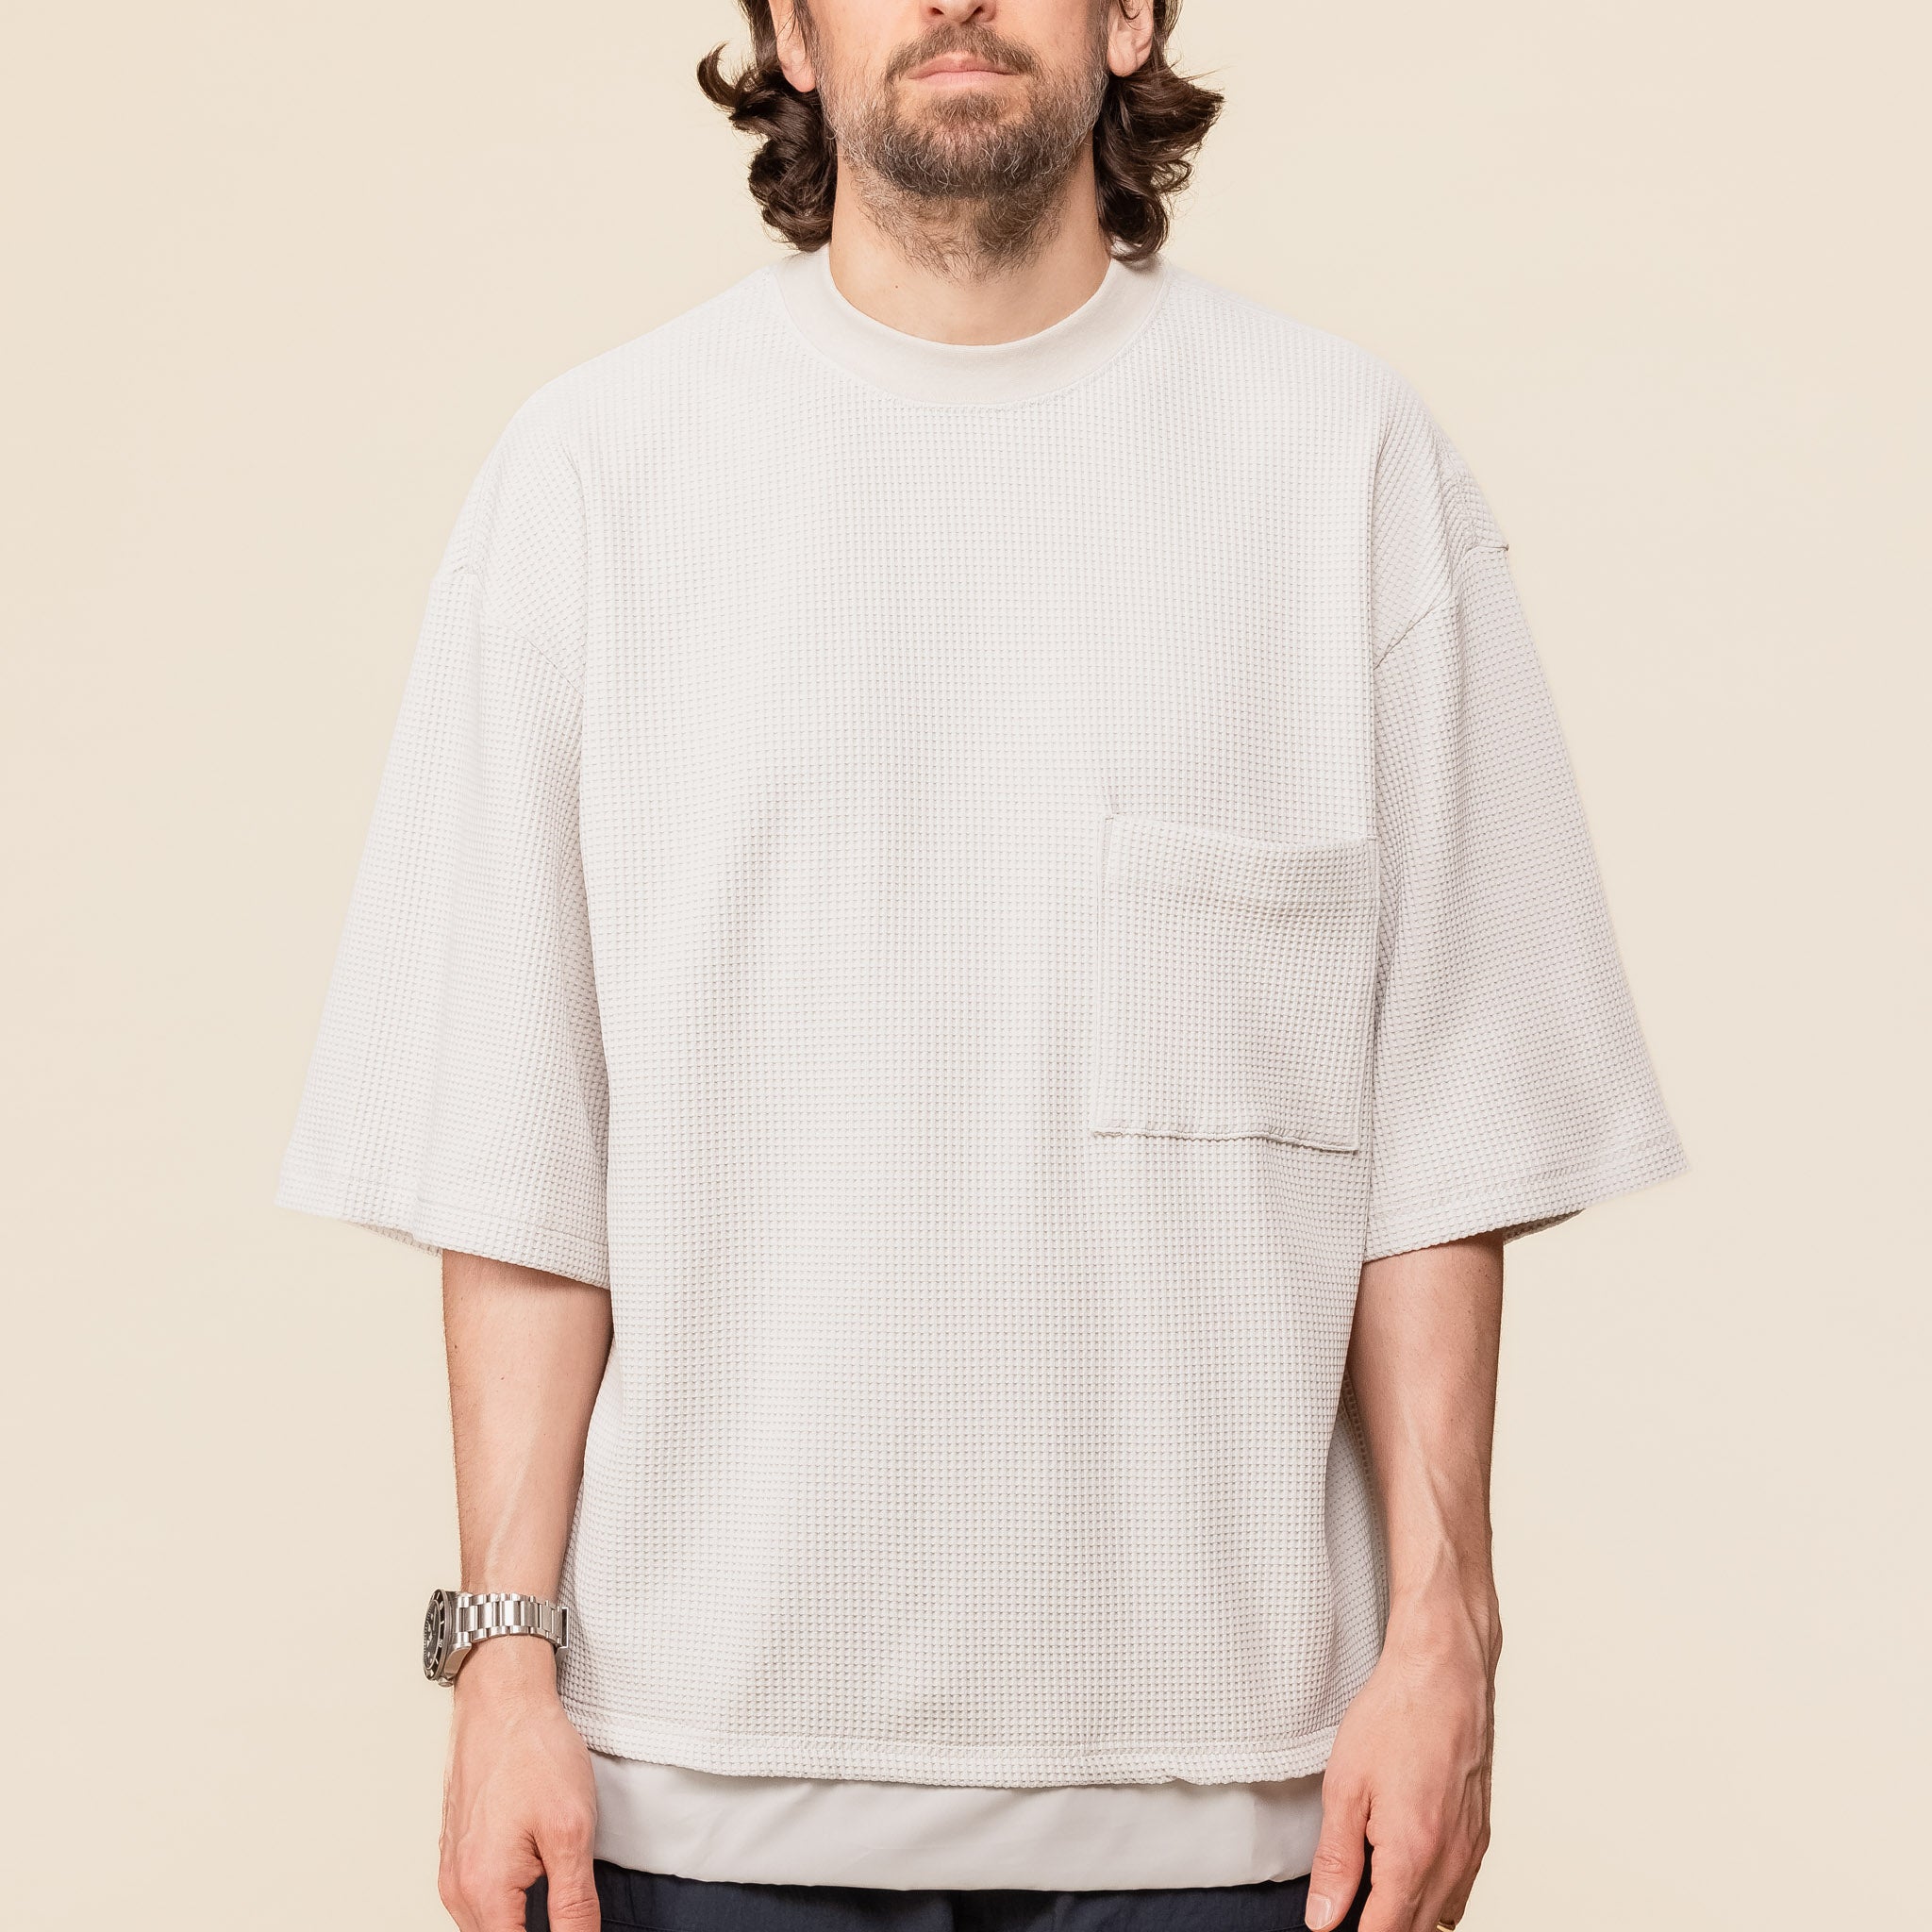 MW-CT24105 Meanswhile - SOLOTEX® Waffle T-Shirt - Bone (Off White)